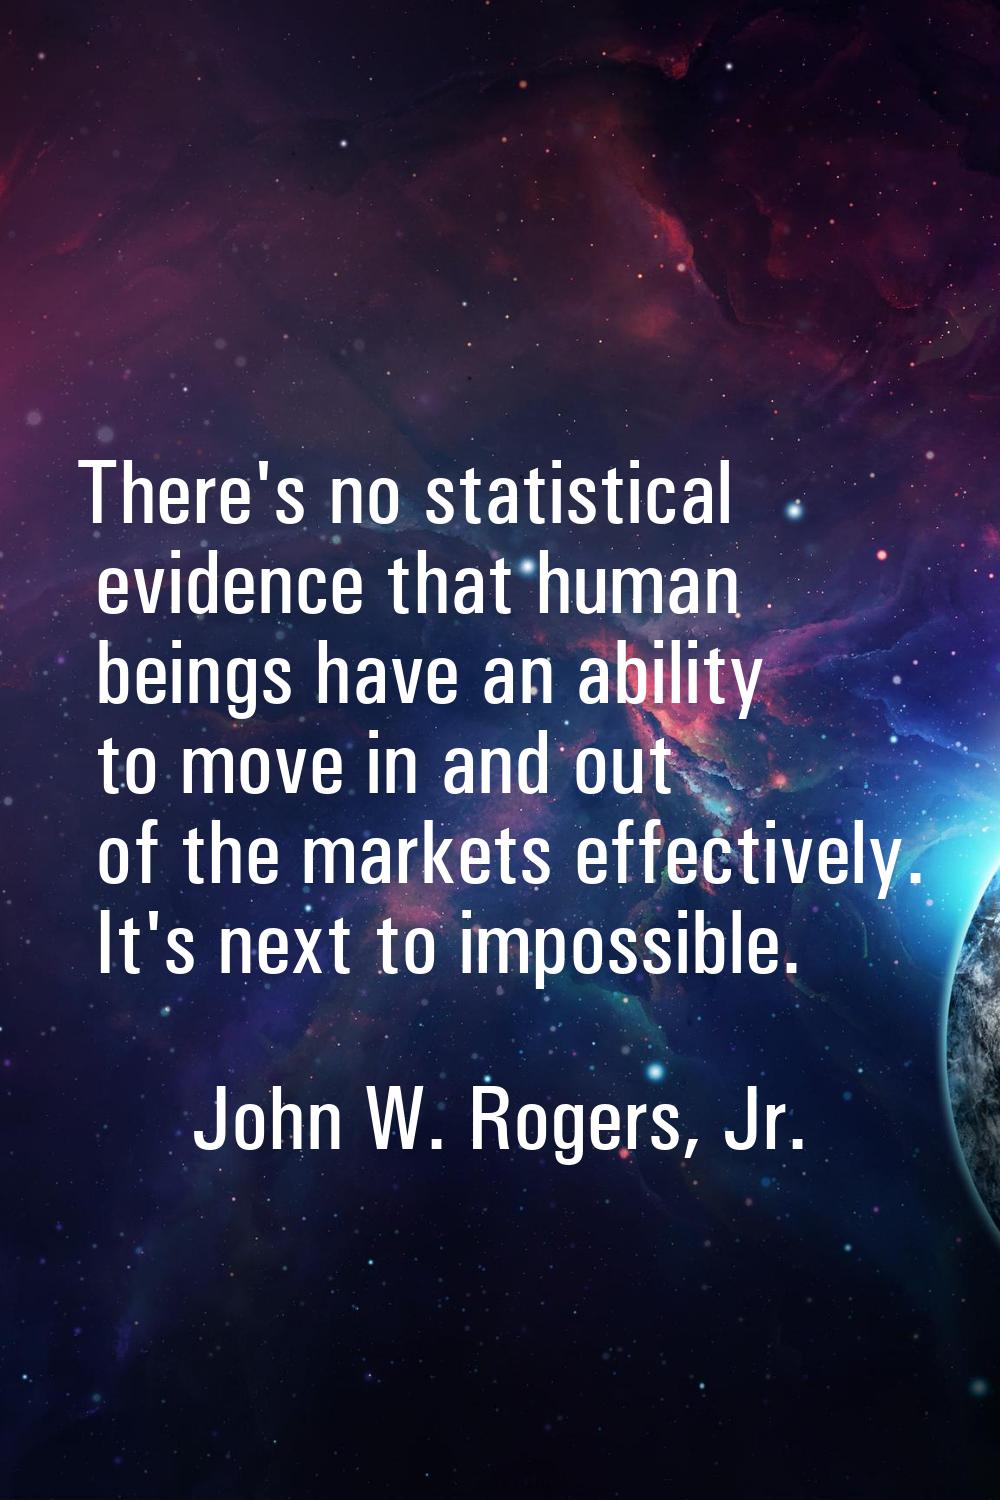 There's no statistical evidence that human beings have an ability to move in and out of the markets